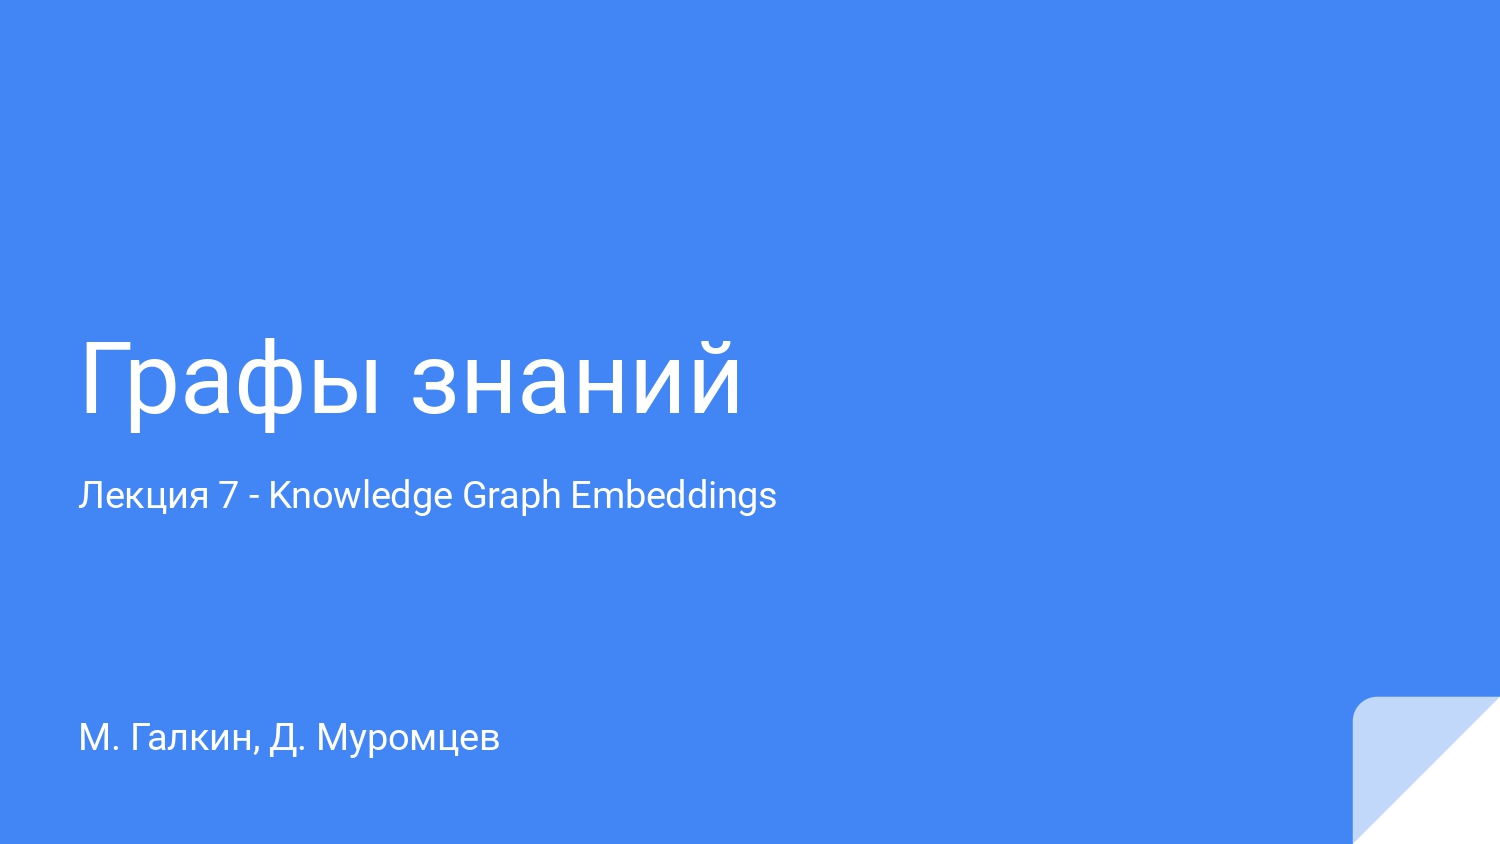 Knowledge Graph Embeddings